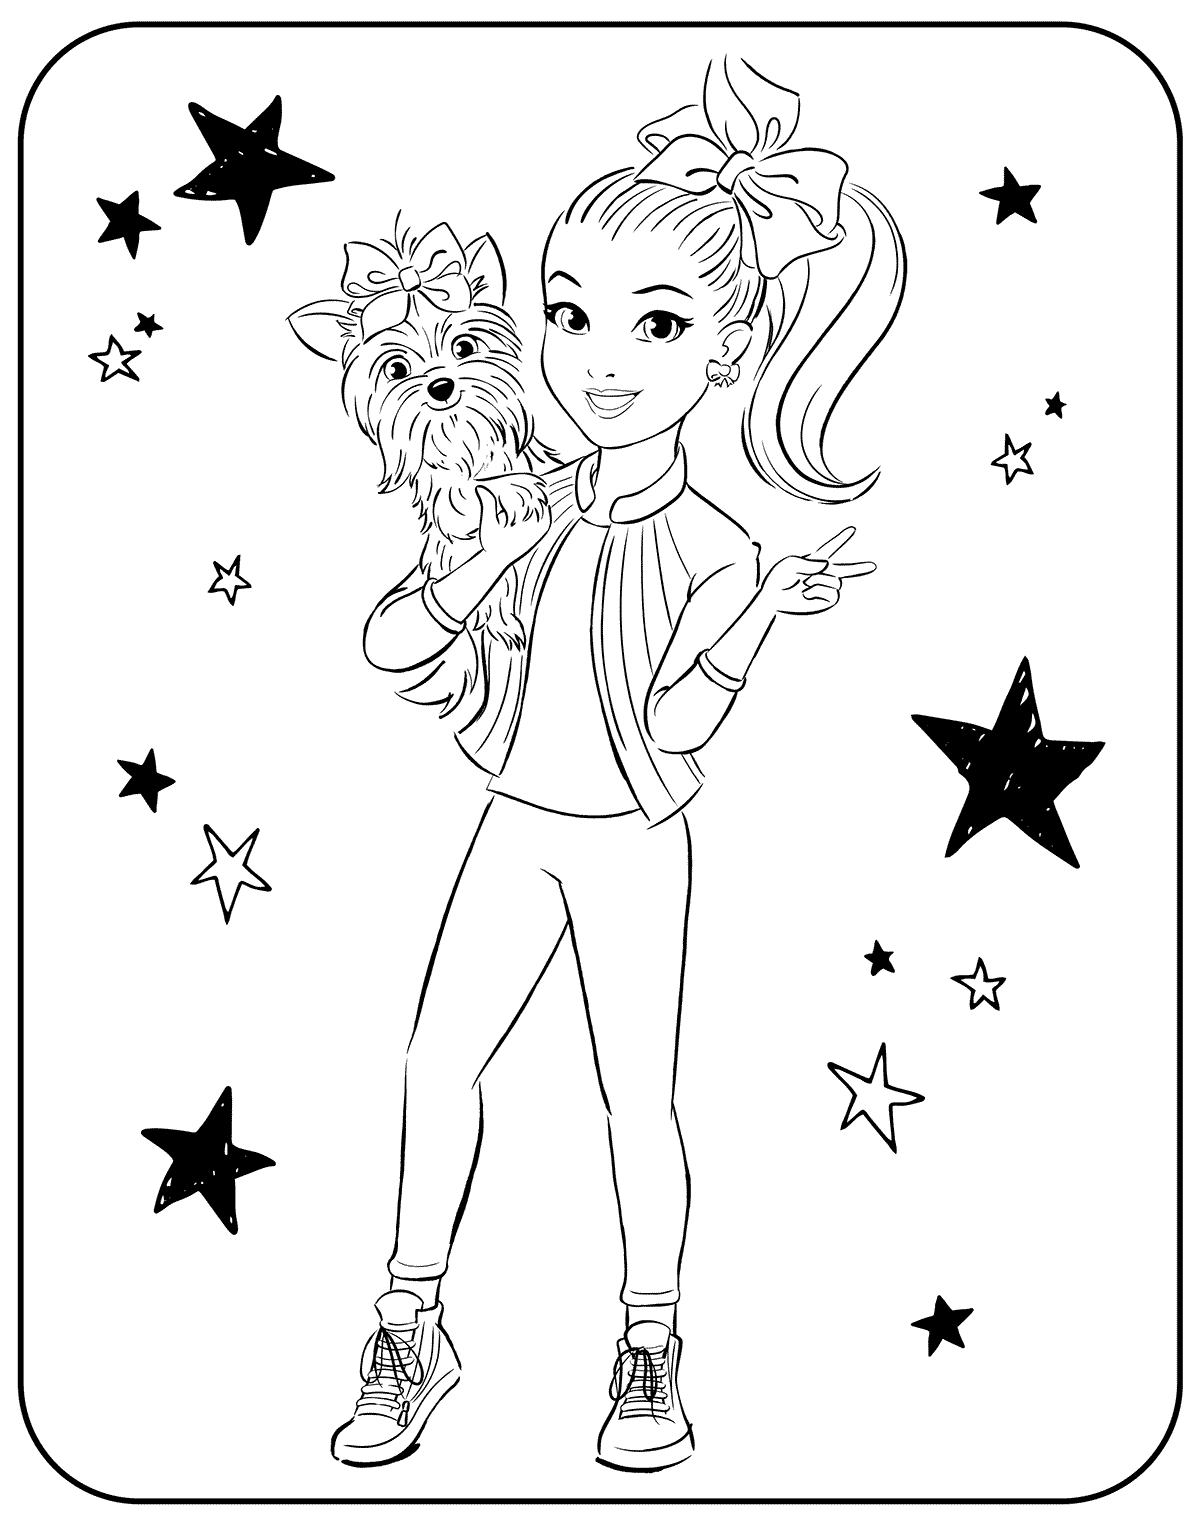 Active sport Bow Bow and Jojo Siwa play together Coloring Page